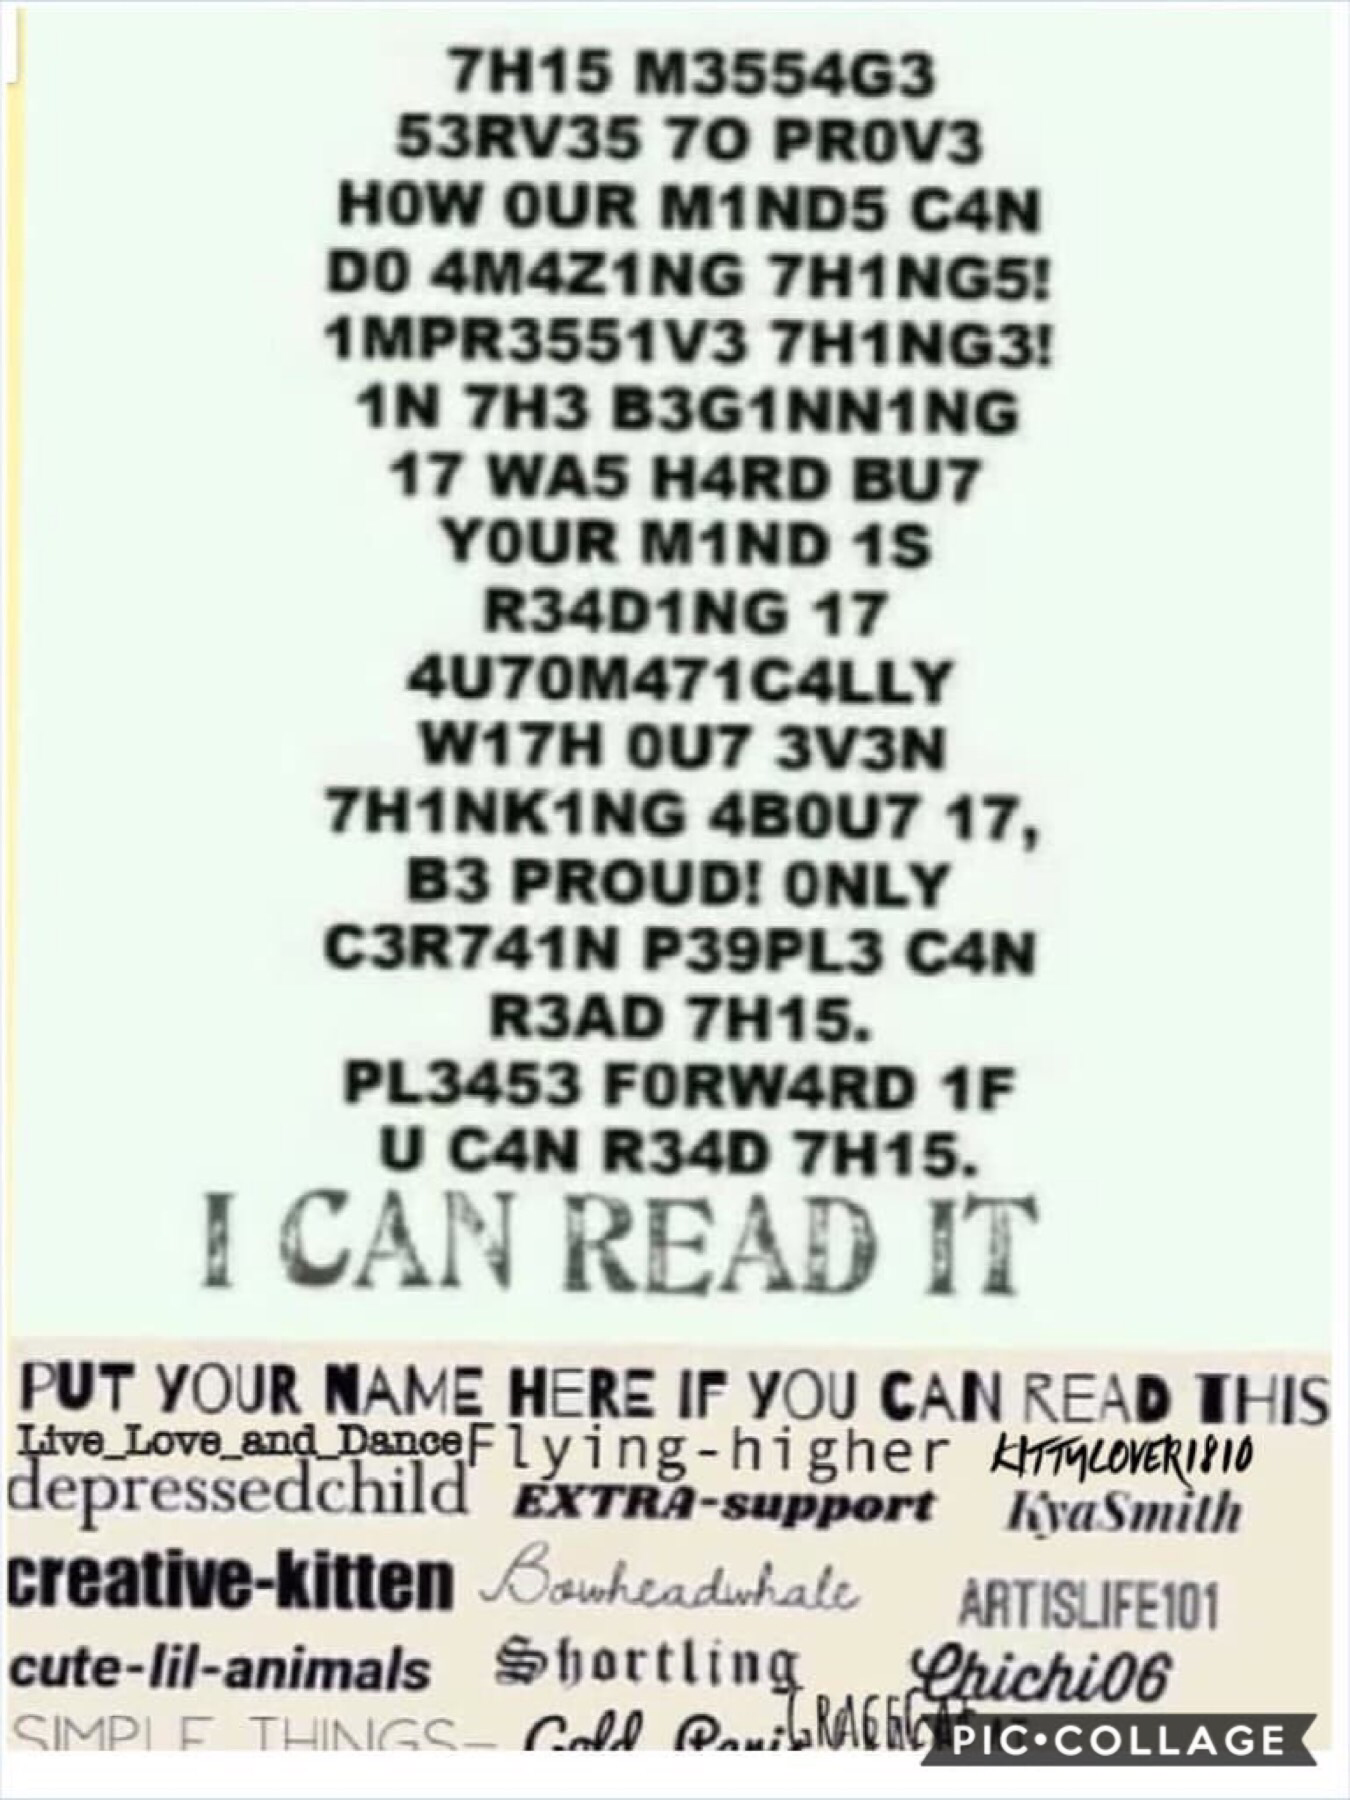 Can you read it? I can!